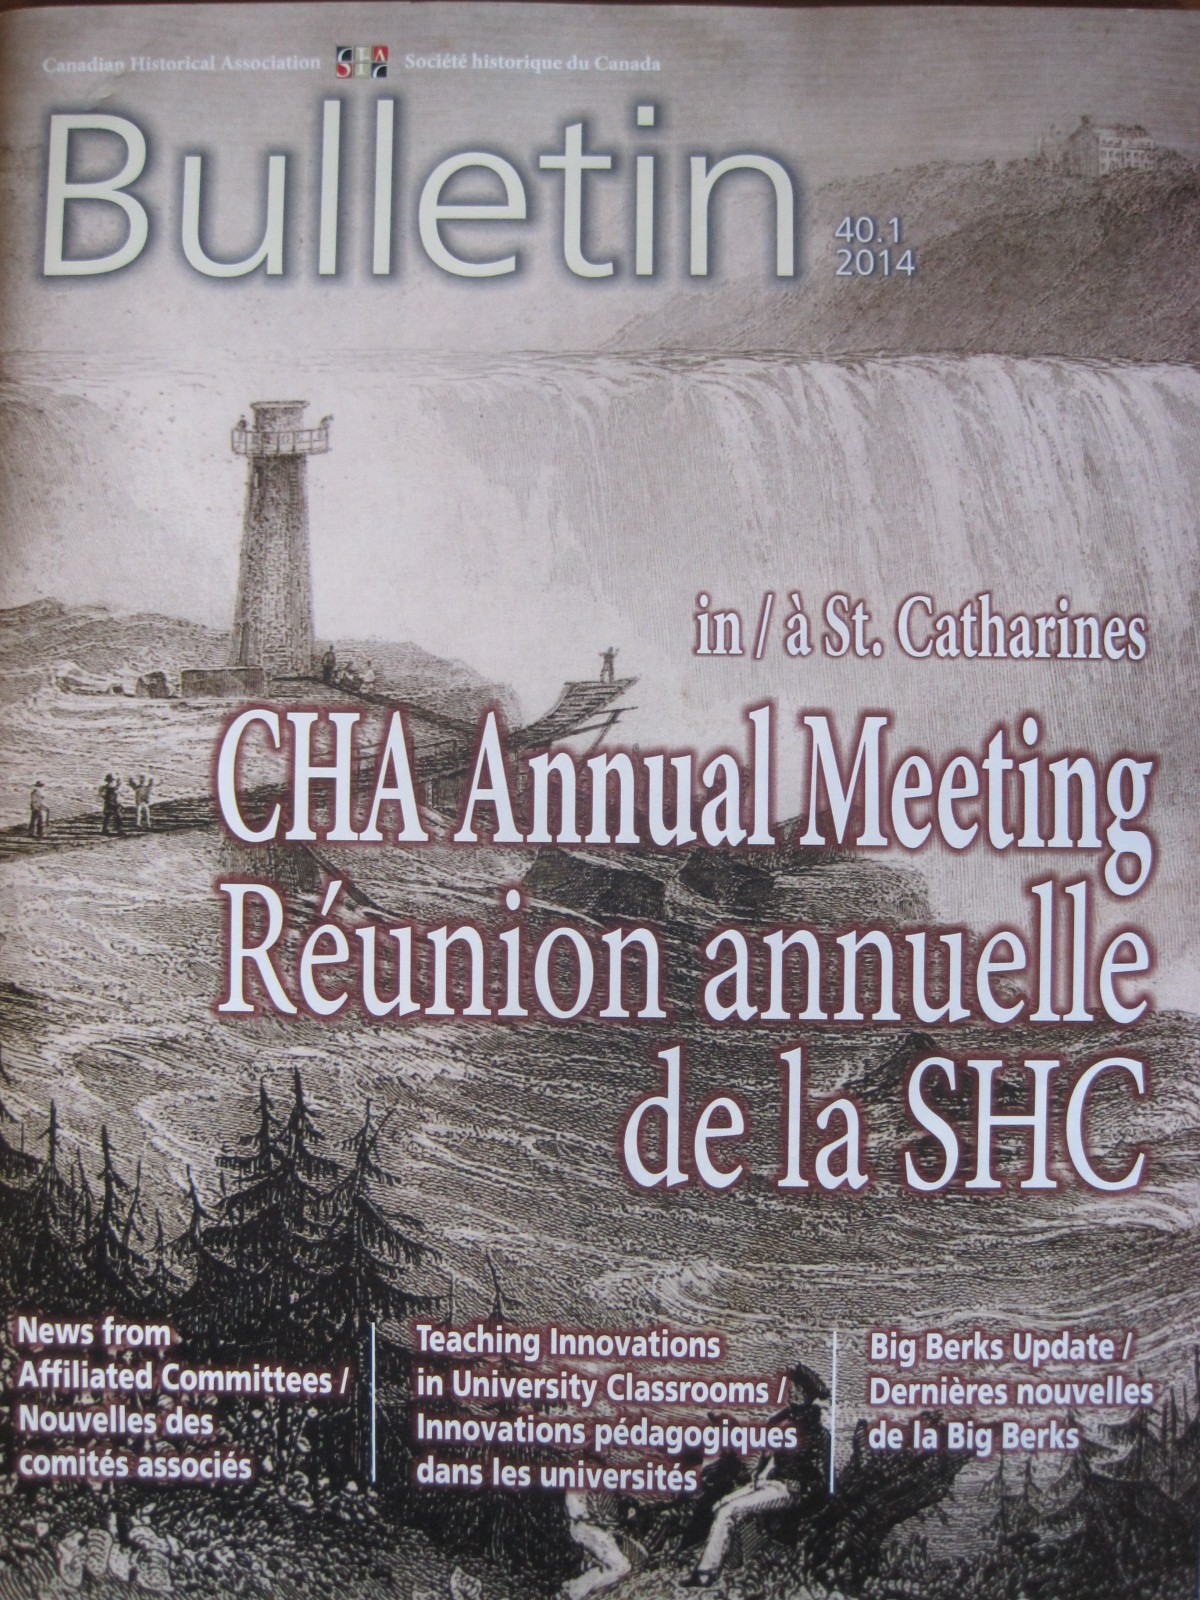 GHC article in the Bulletin of the Canadian Historical Association